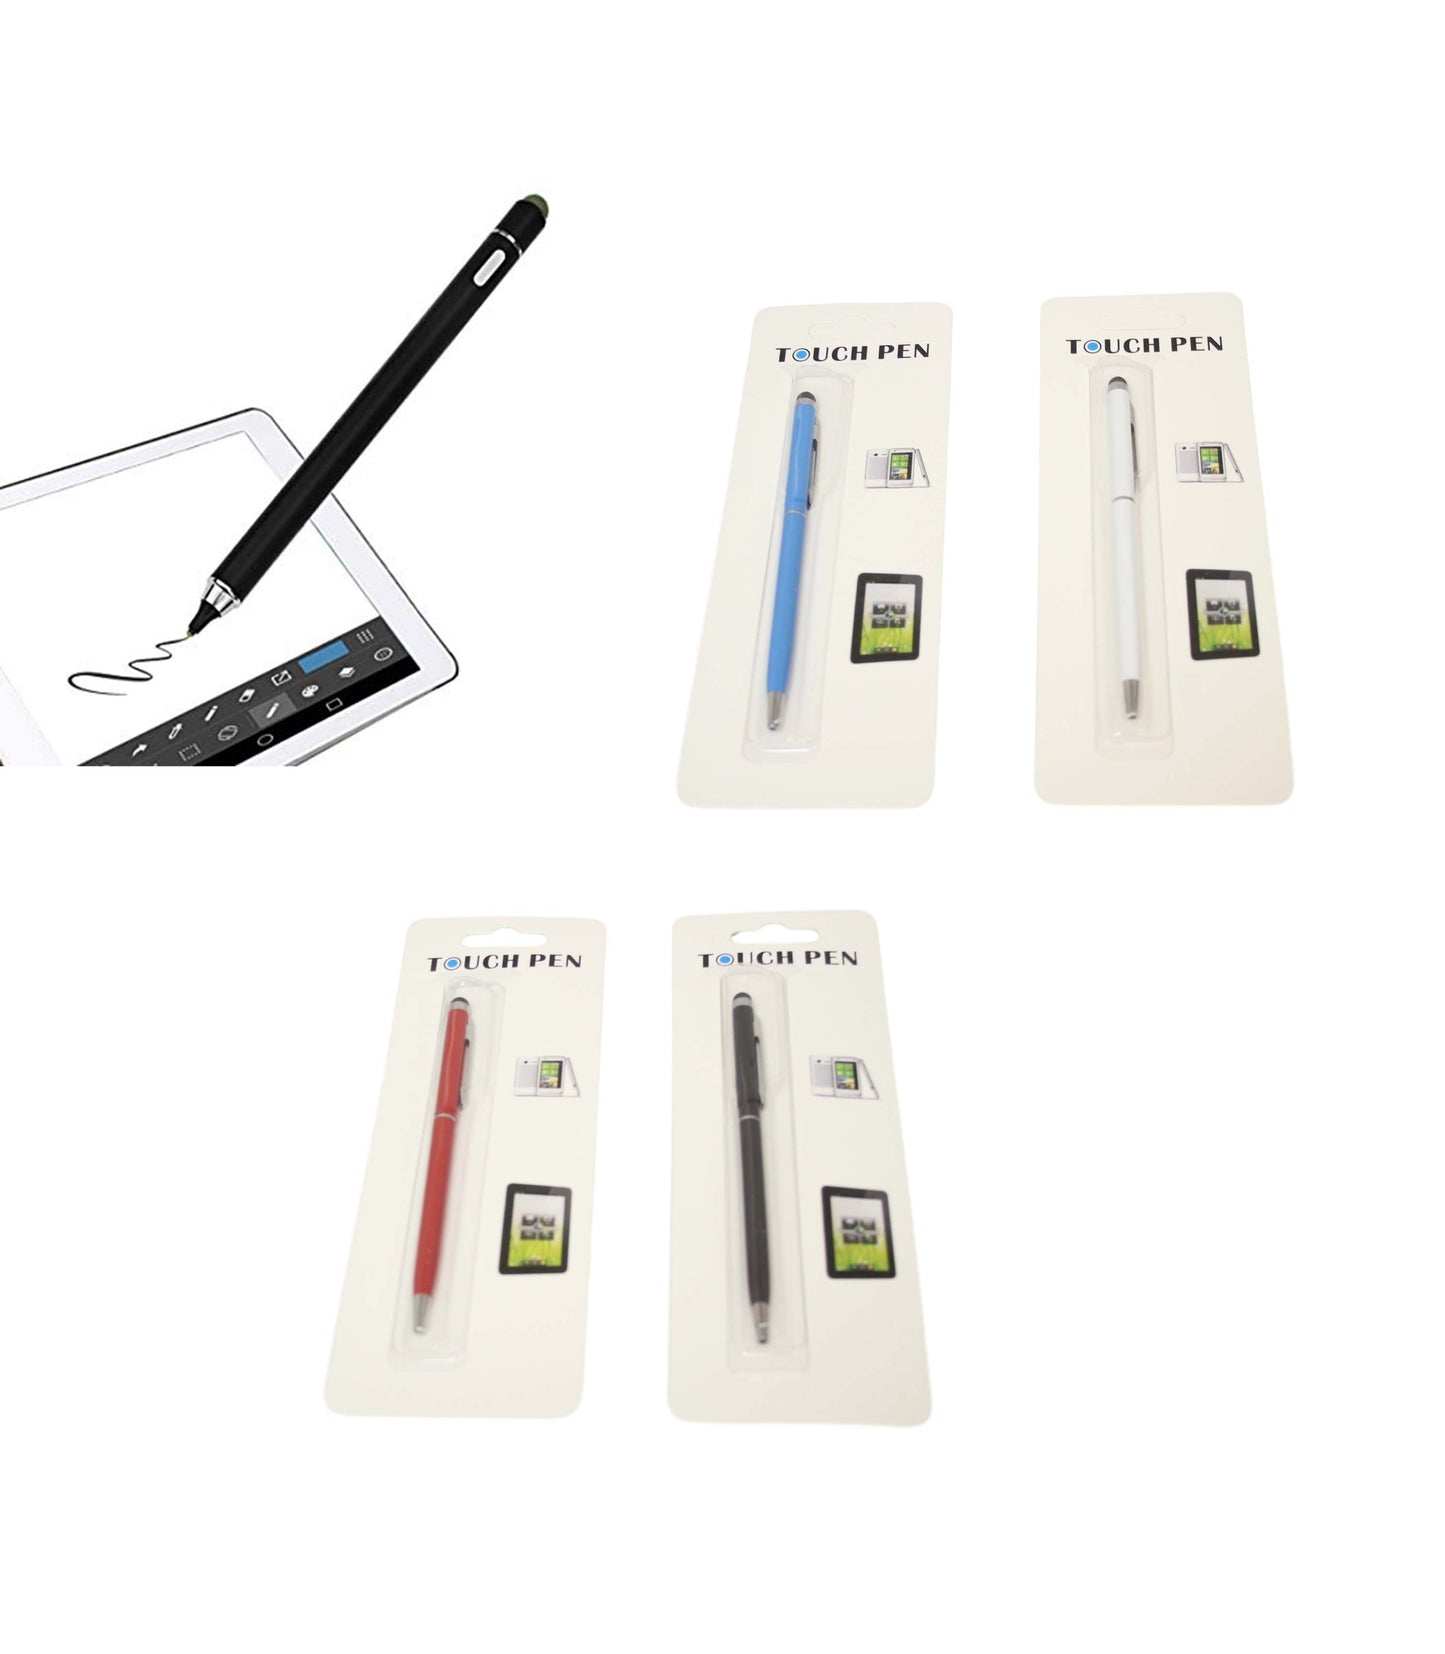 Touch Screen Modern Rubber Tip Mobile Phone Ipad Multi Use Pen/ Ink Pen 14cm 6216 (Large Letter Rate)